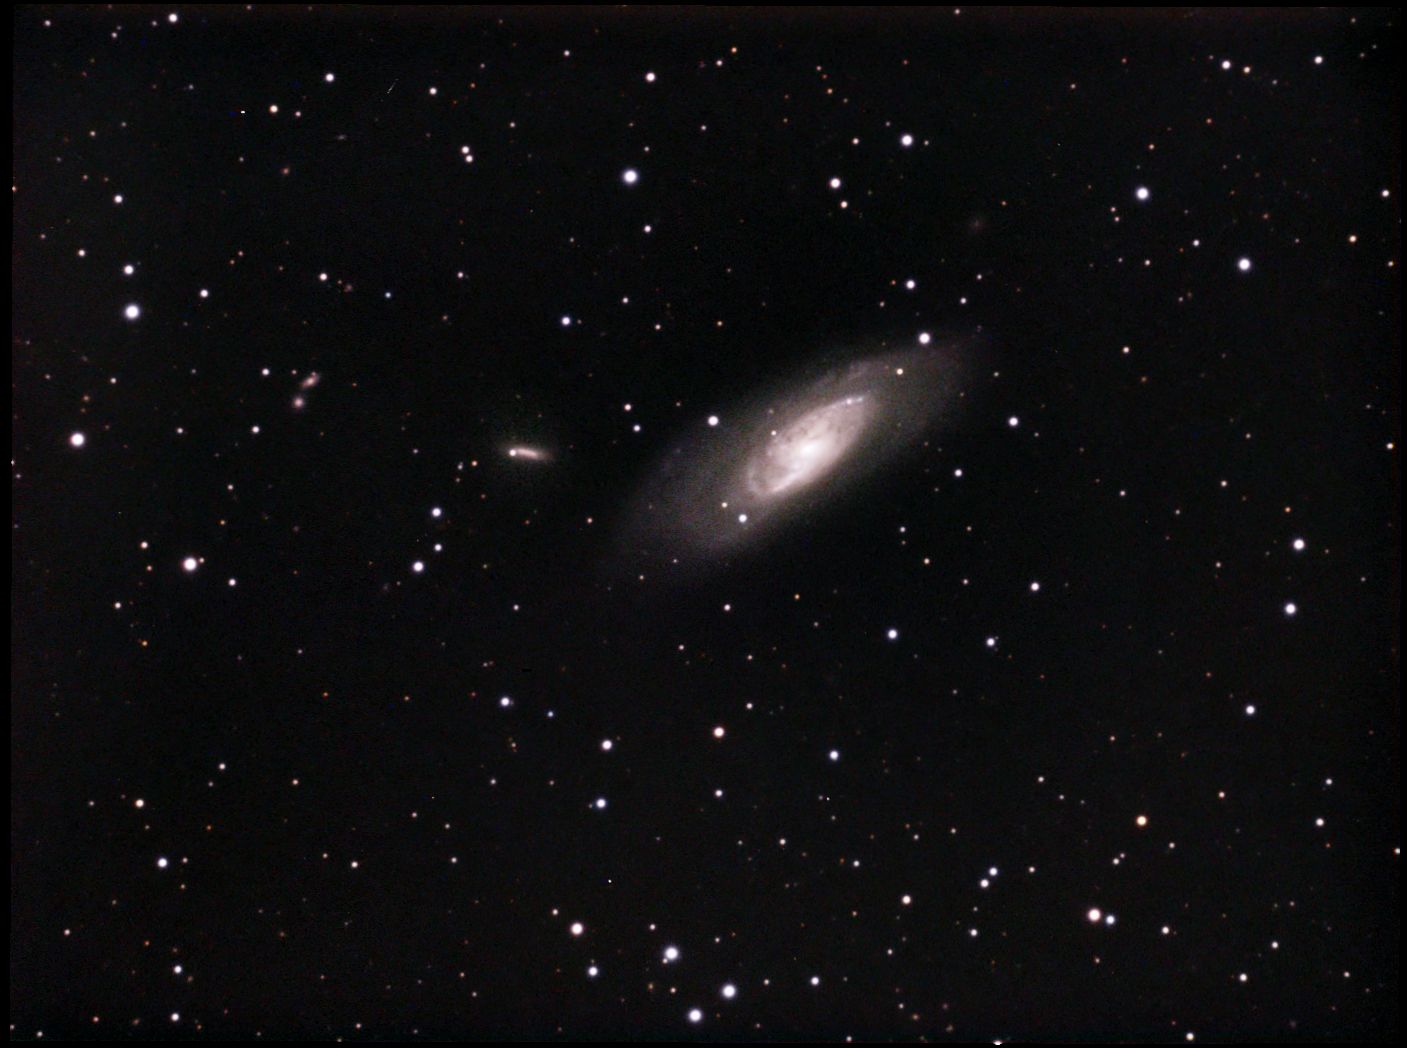 M106 - Galaxy in Canes Venatici | Astronomy images at Orion Telescope